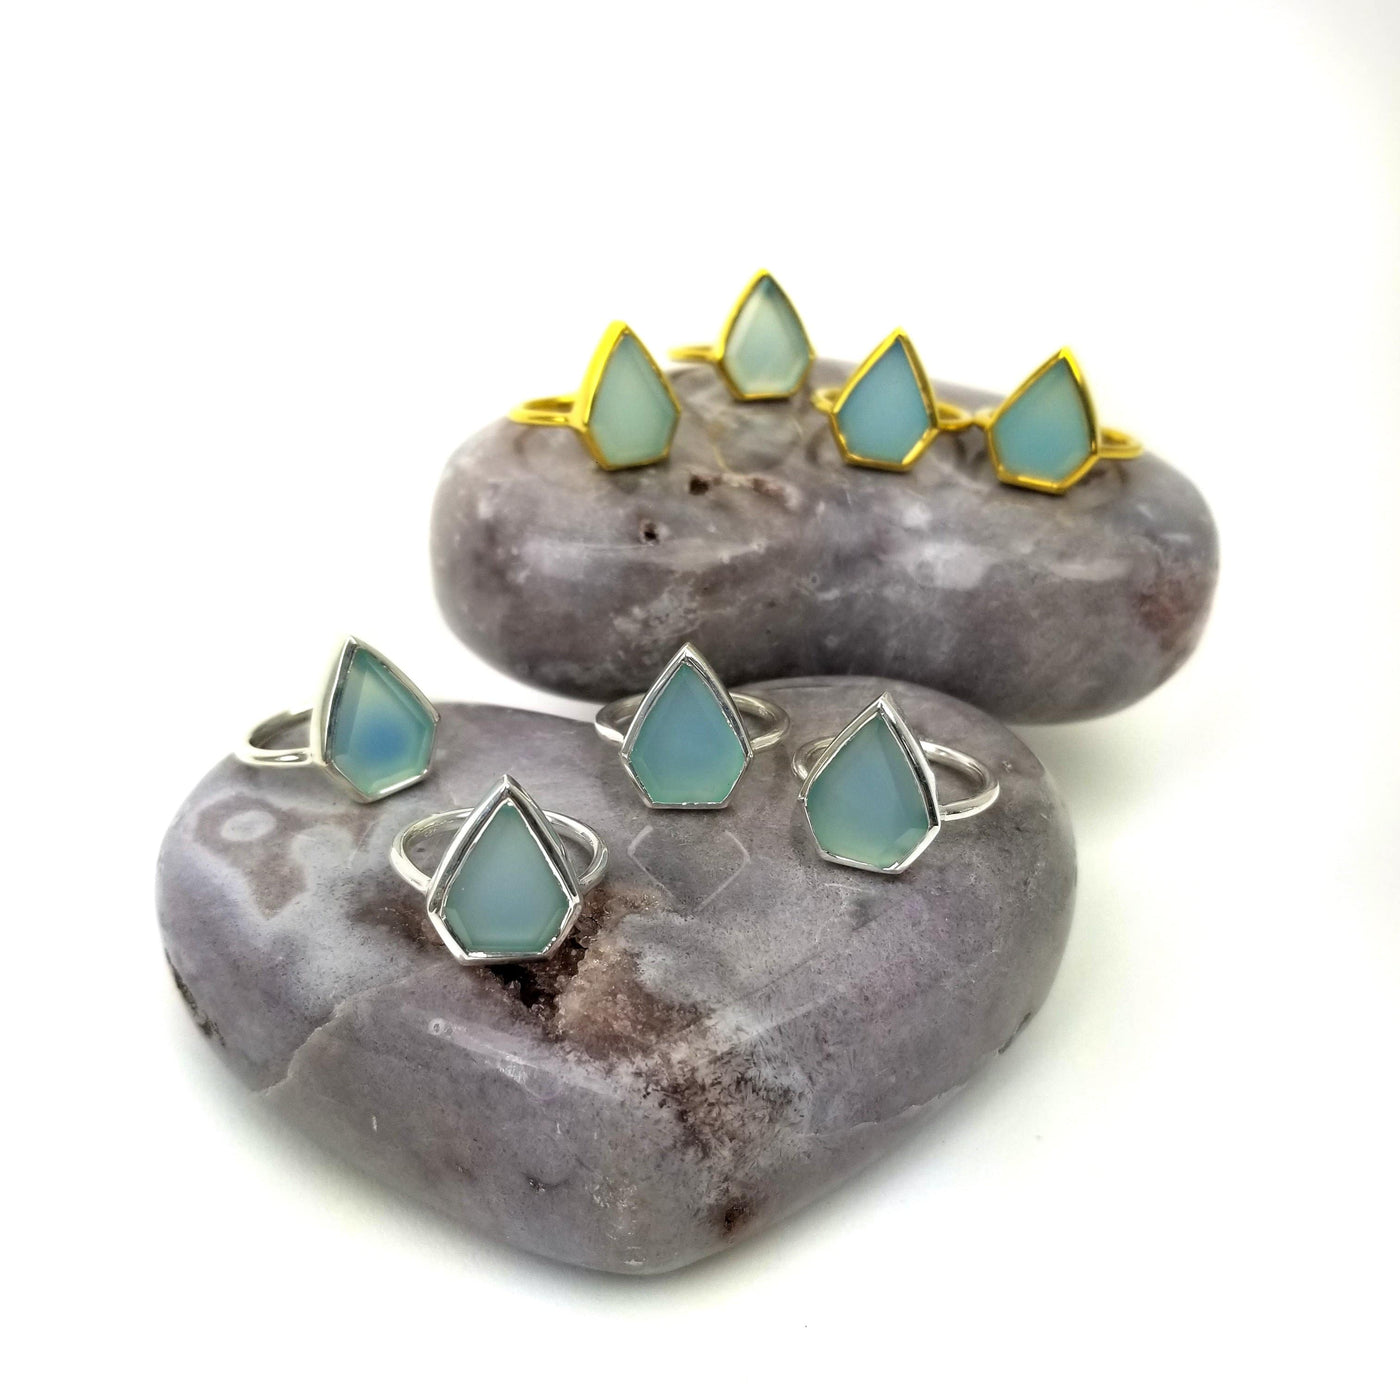 8 Aqua Chalcedony Arrowhead Stone rings in gold and silver 